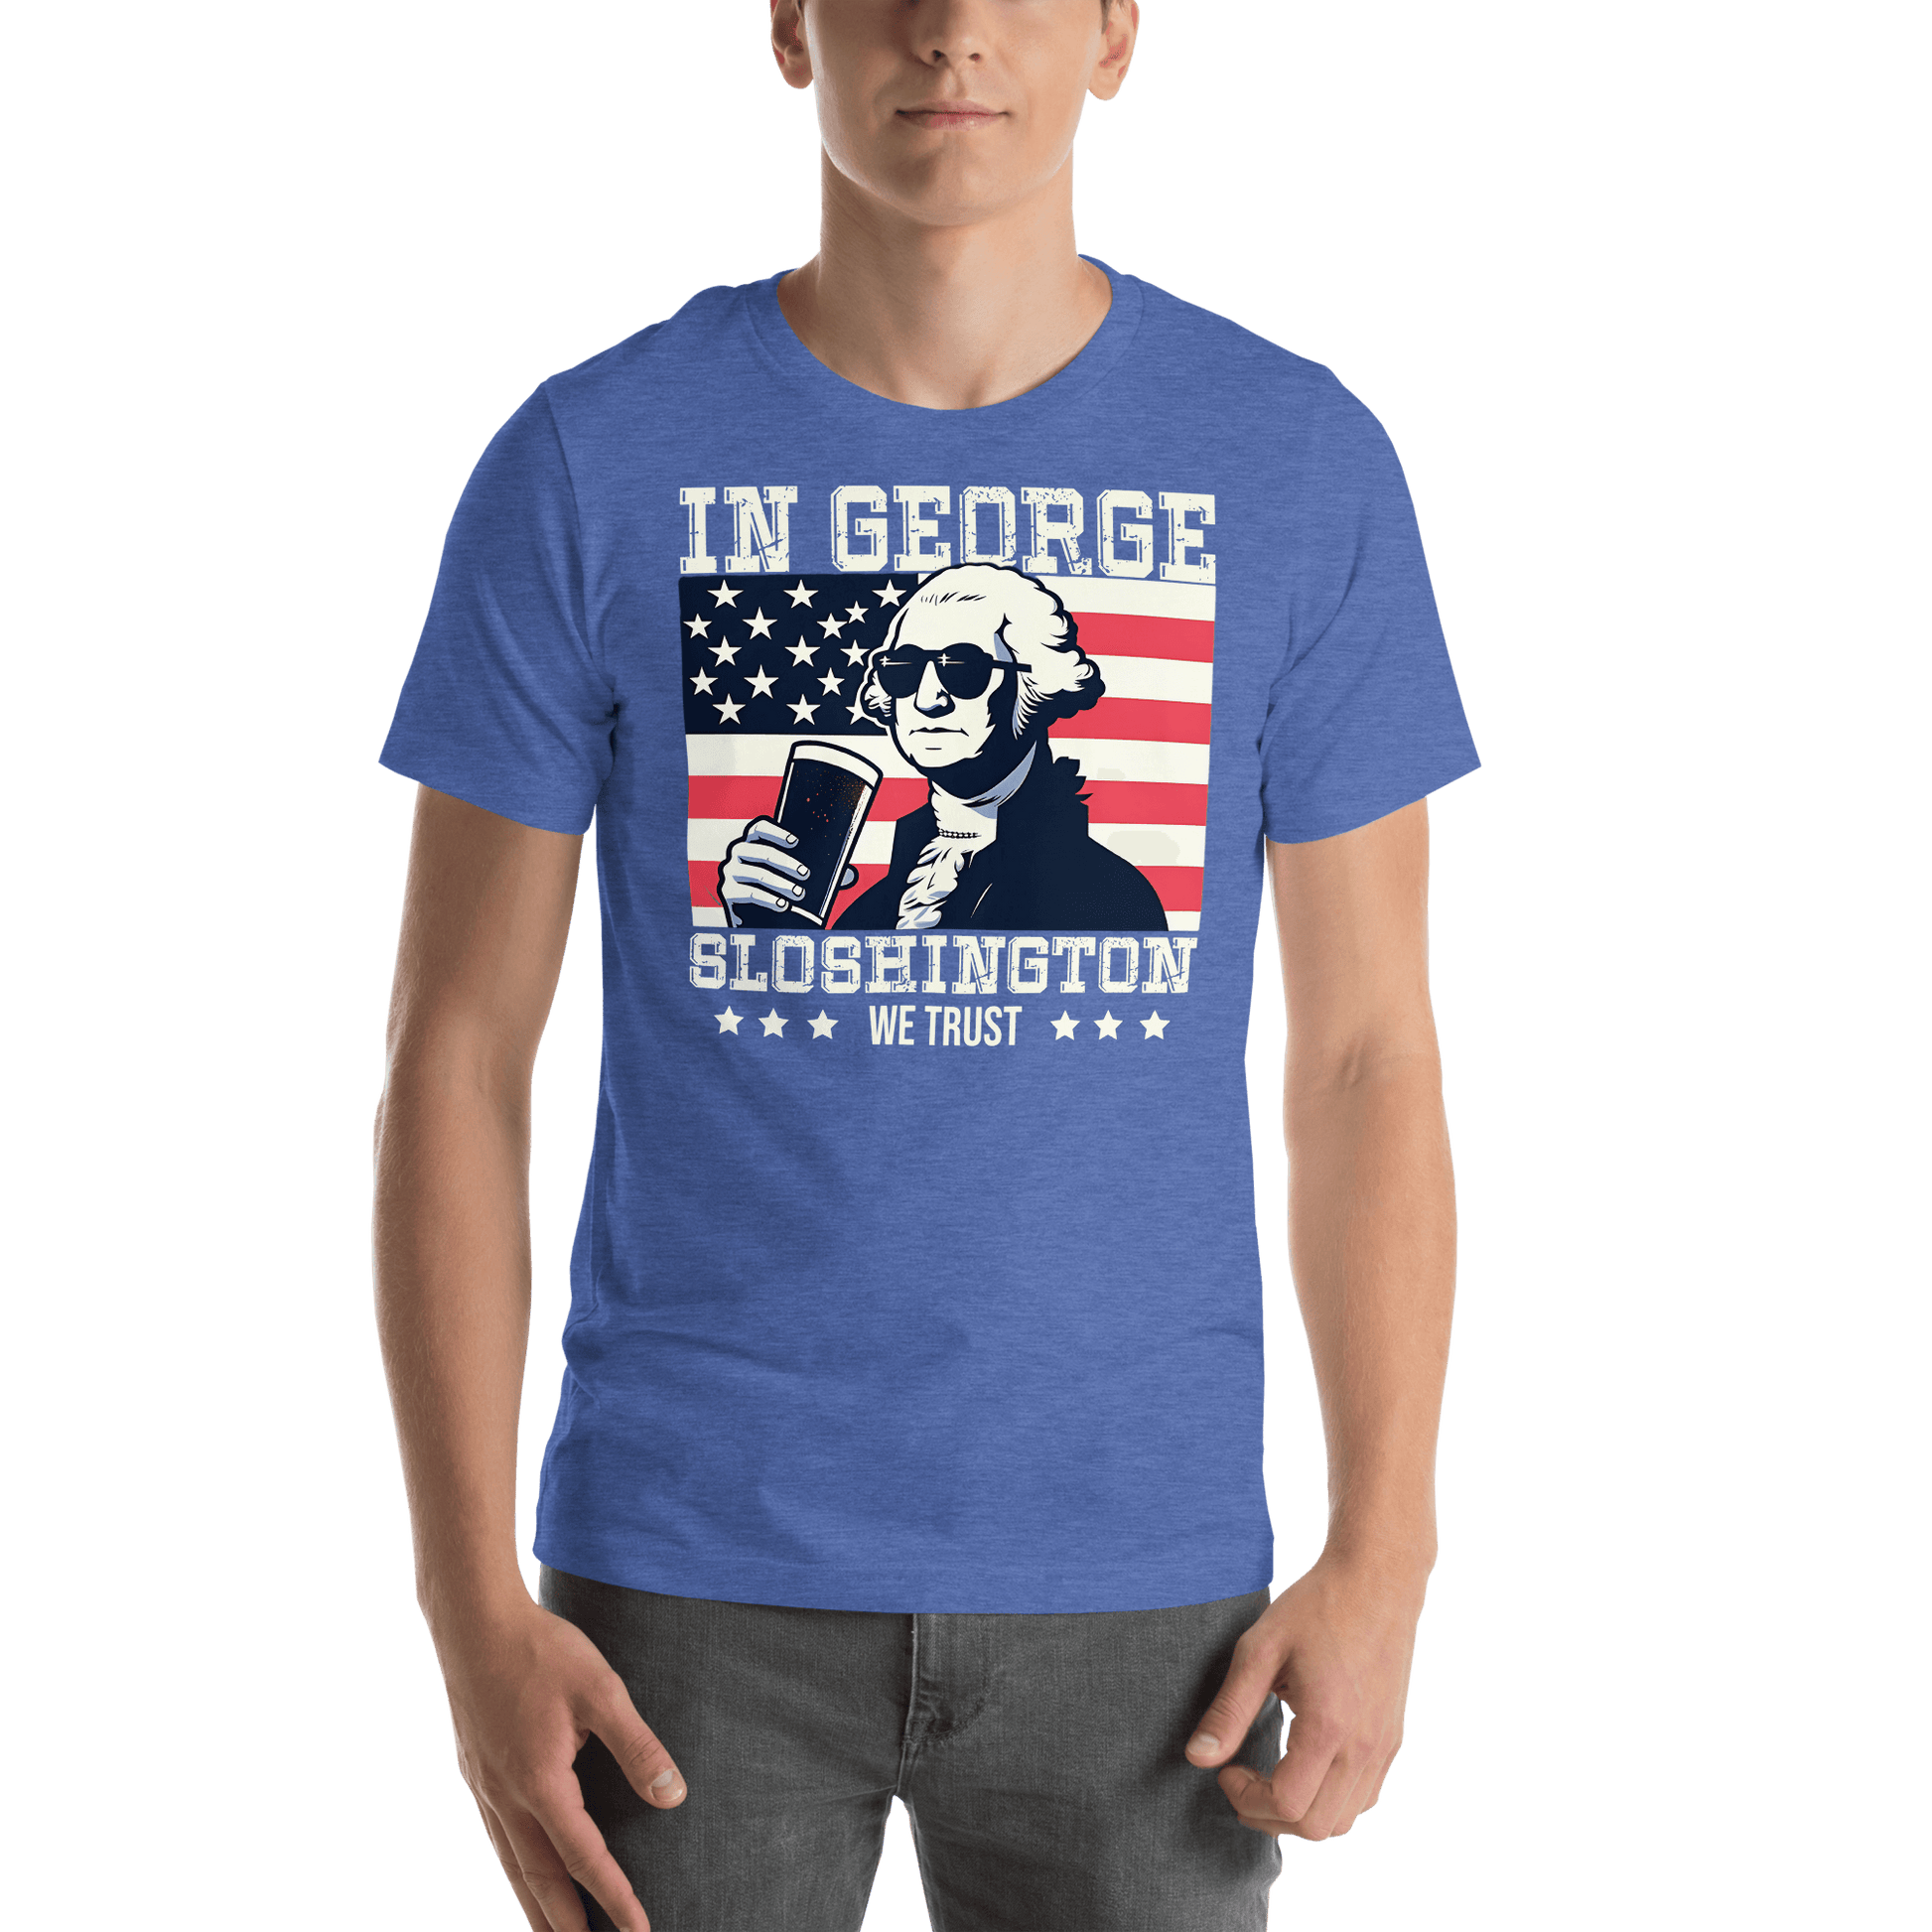 T-shirt with In George Sloshington We Trust text, image of George Washington drinking a beer, and distressed American flag background. Perfect for 4th of July.